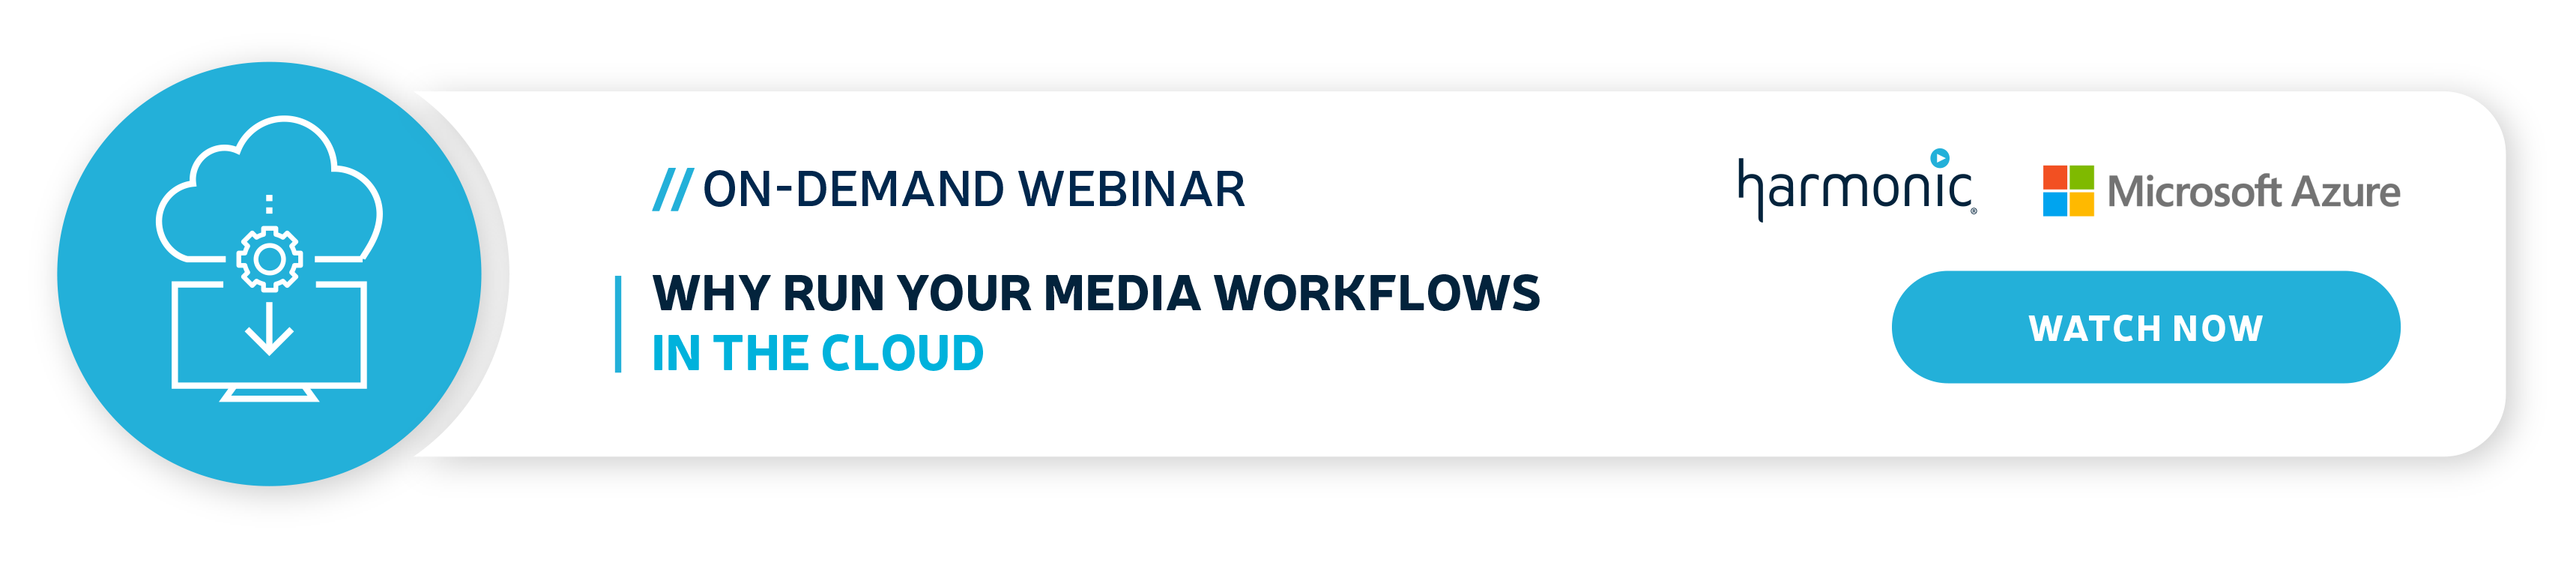 Media Workflows in the Cloud